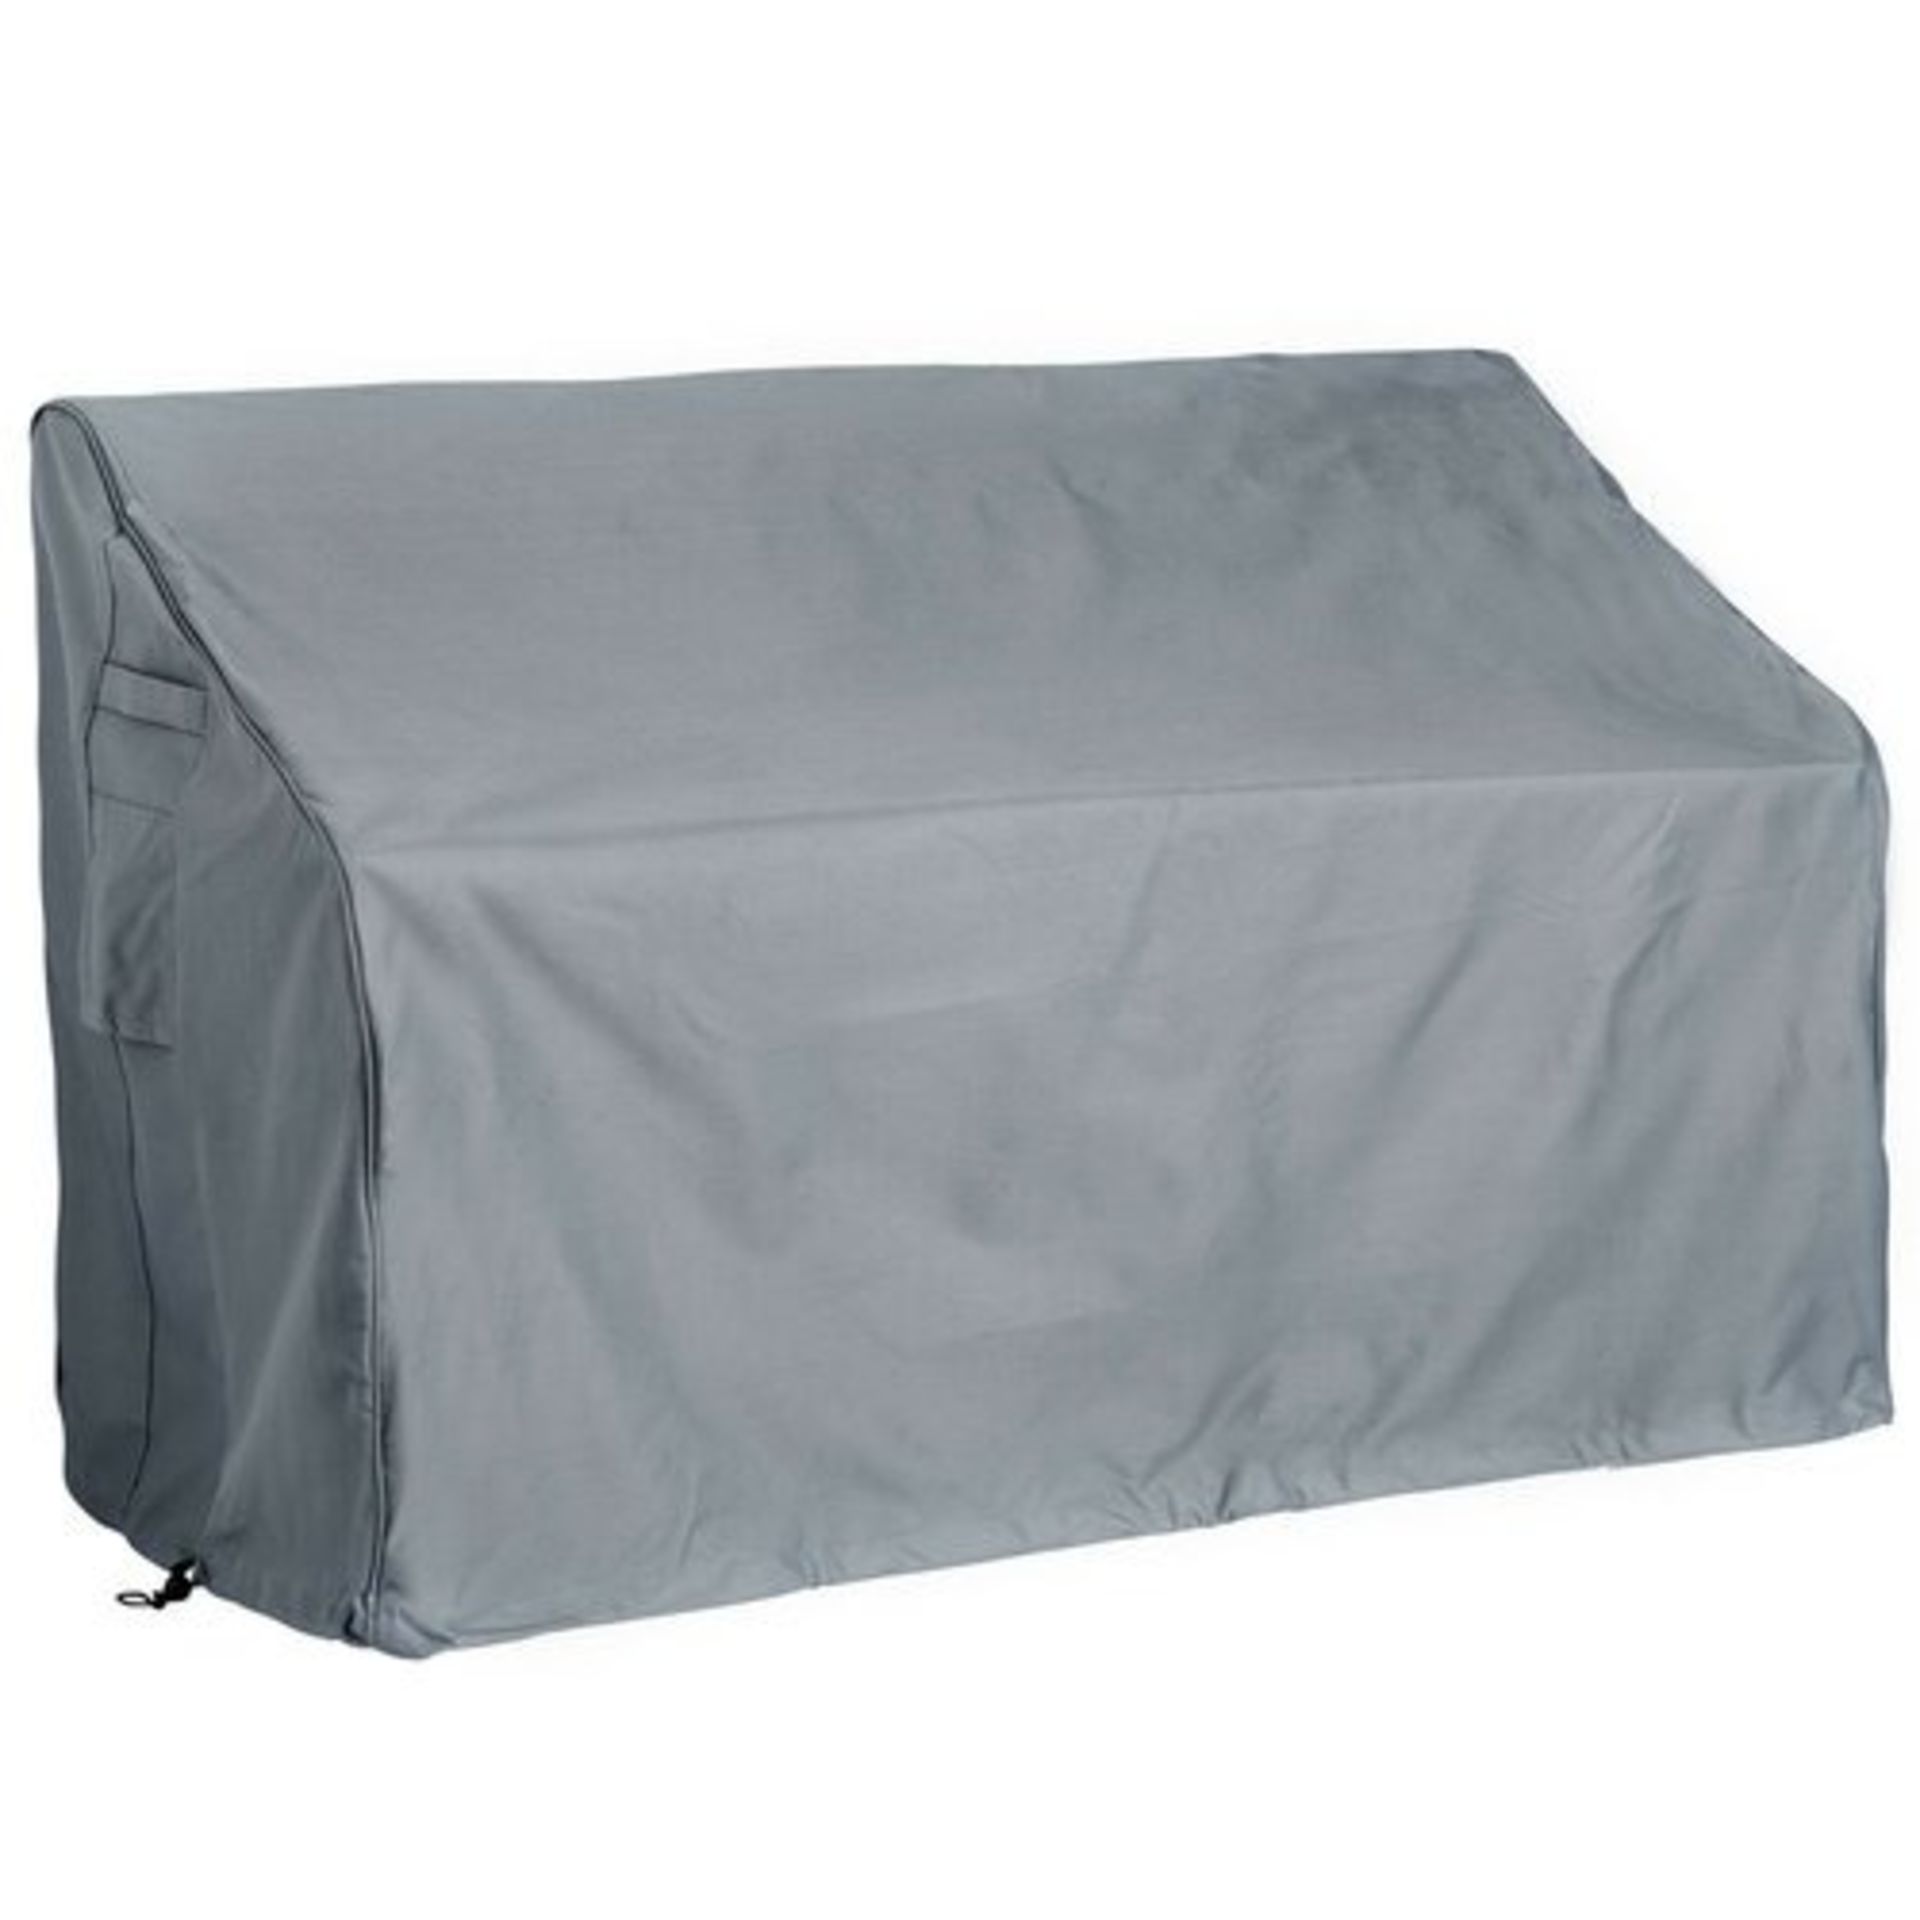 3 Seater Bench Cover - ER51